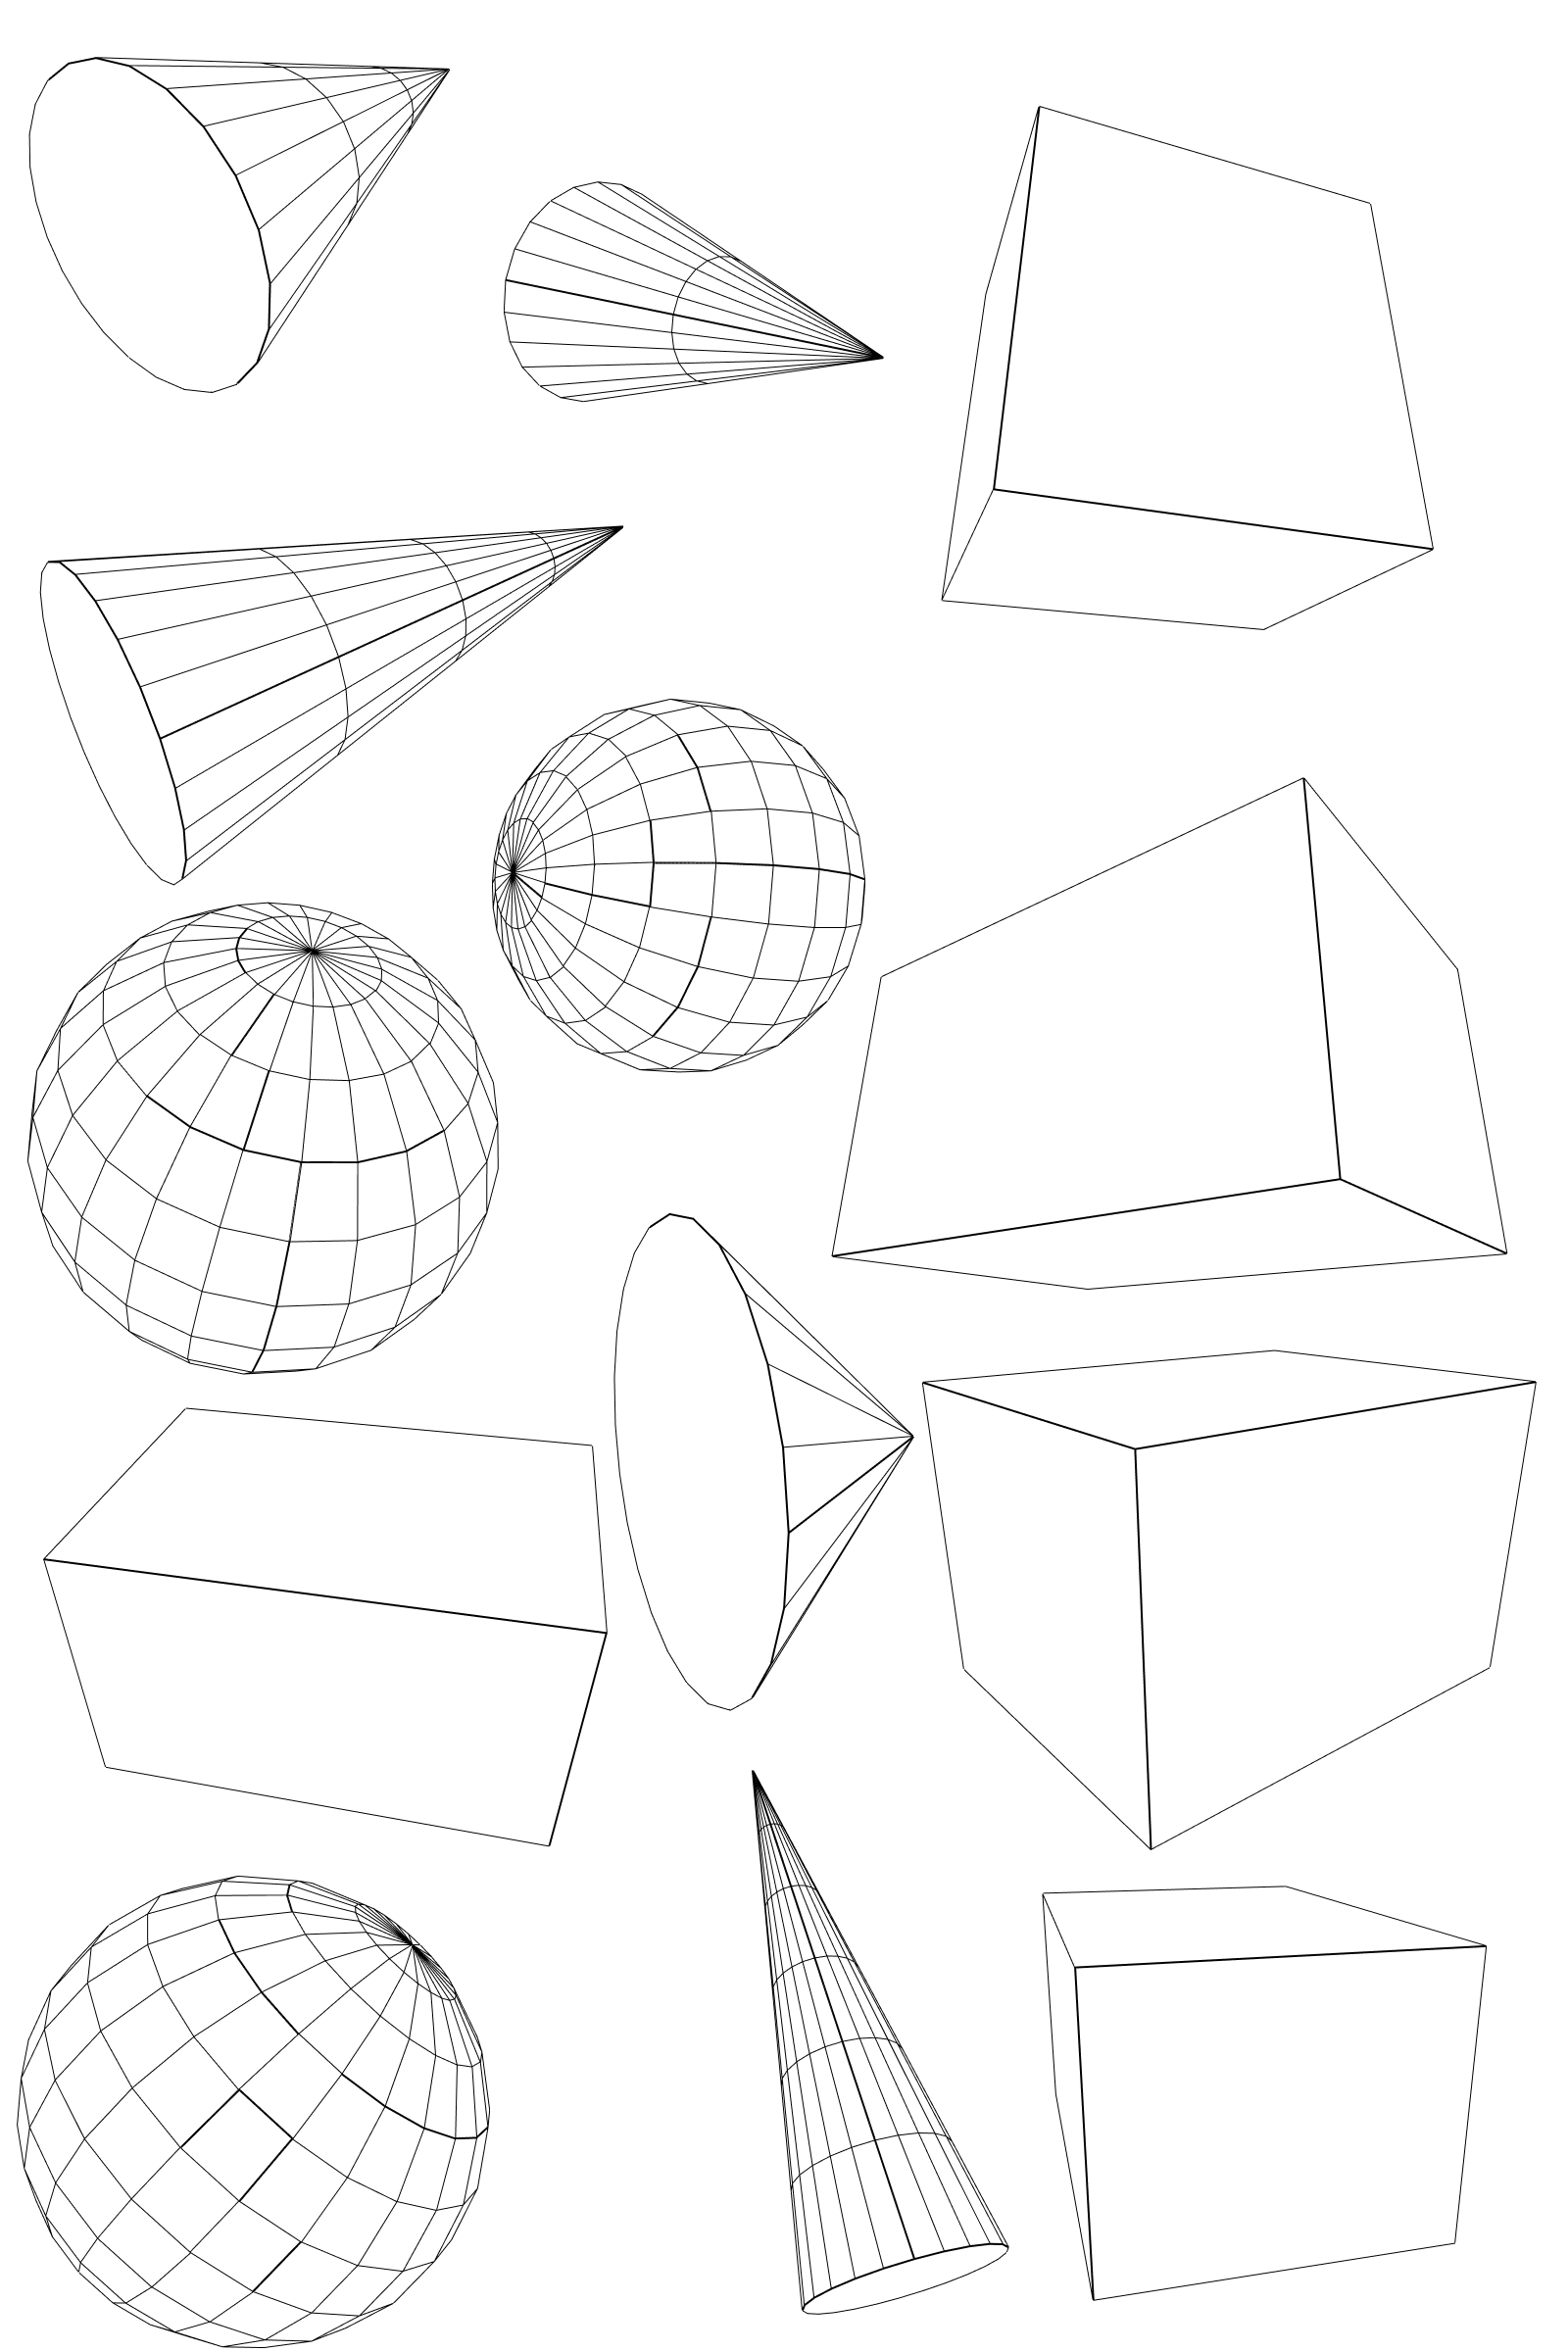 draw boxes spheres cones cylinders as a warm-up